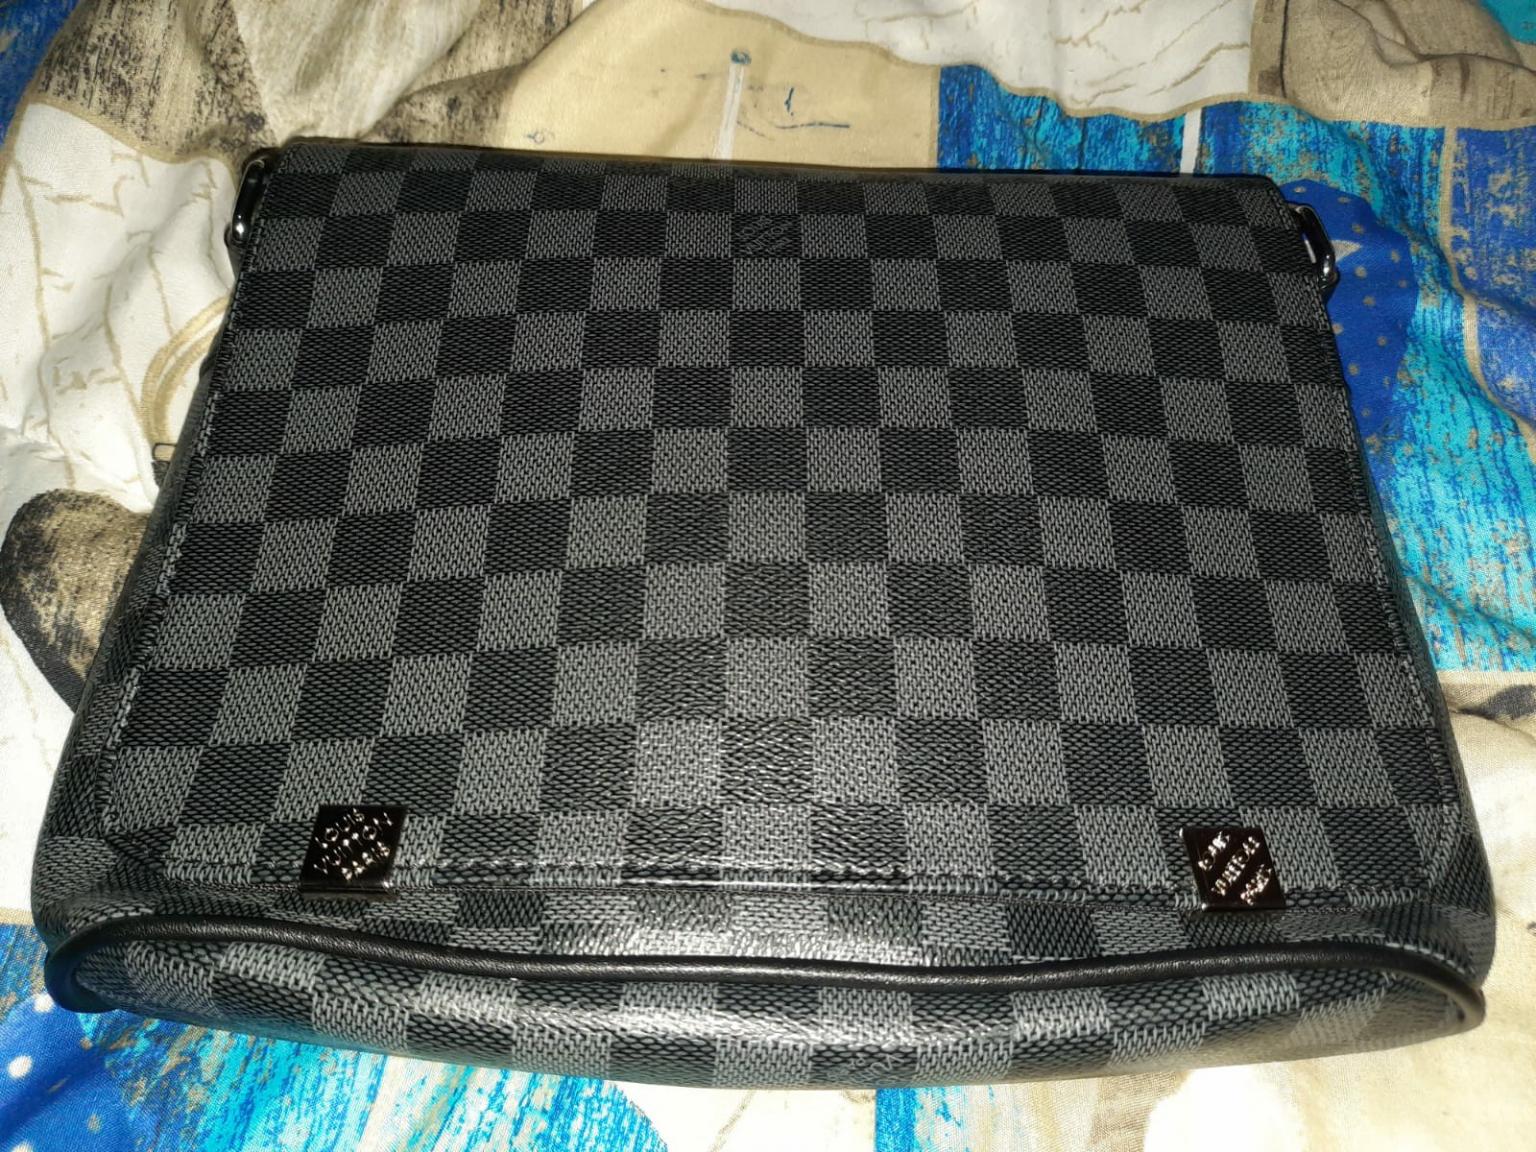 Louis Vuitton tracolla - Vinted